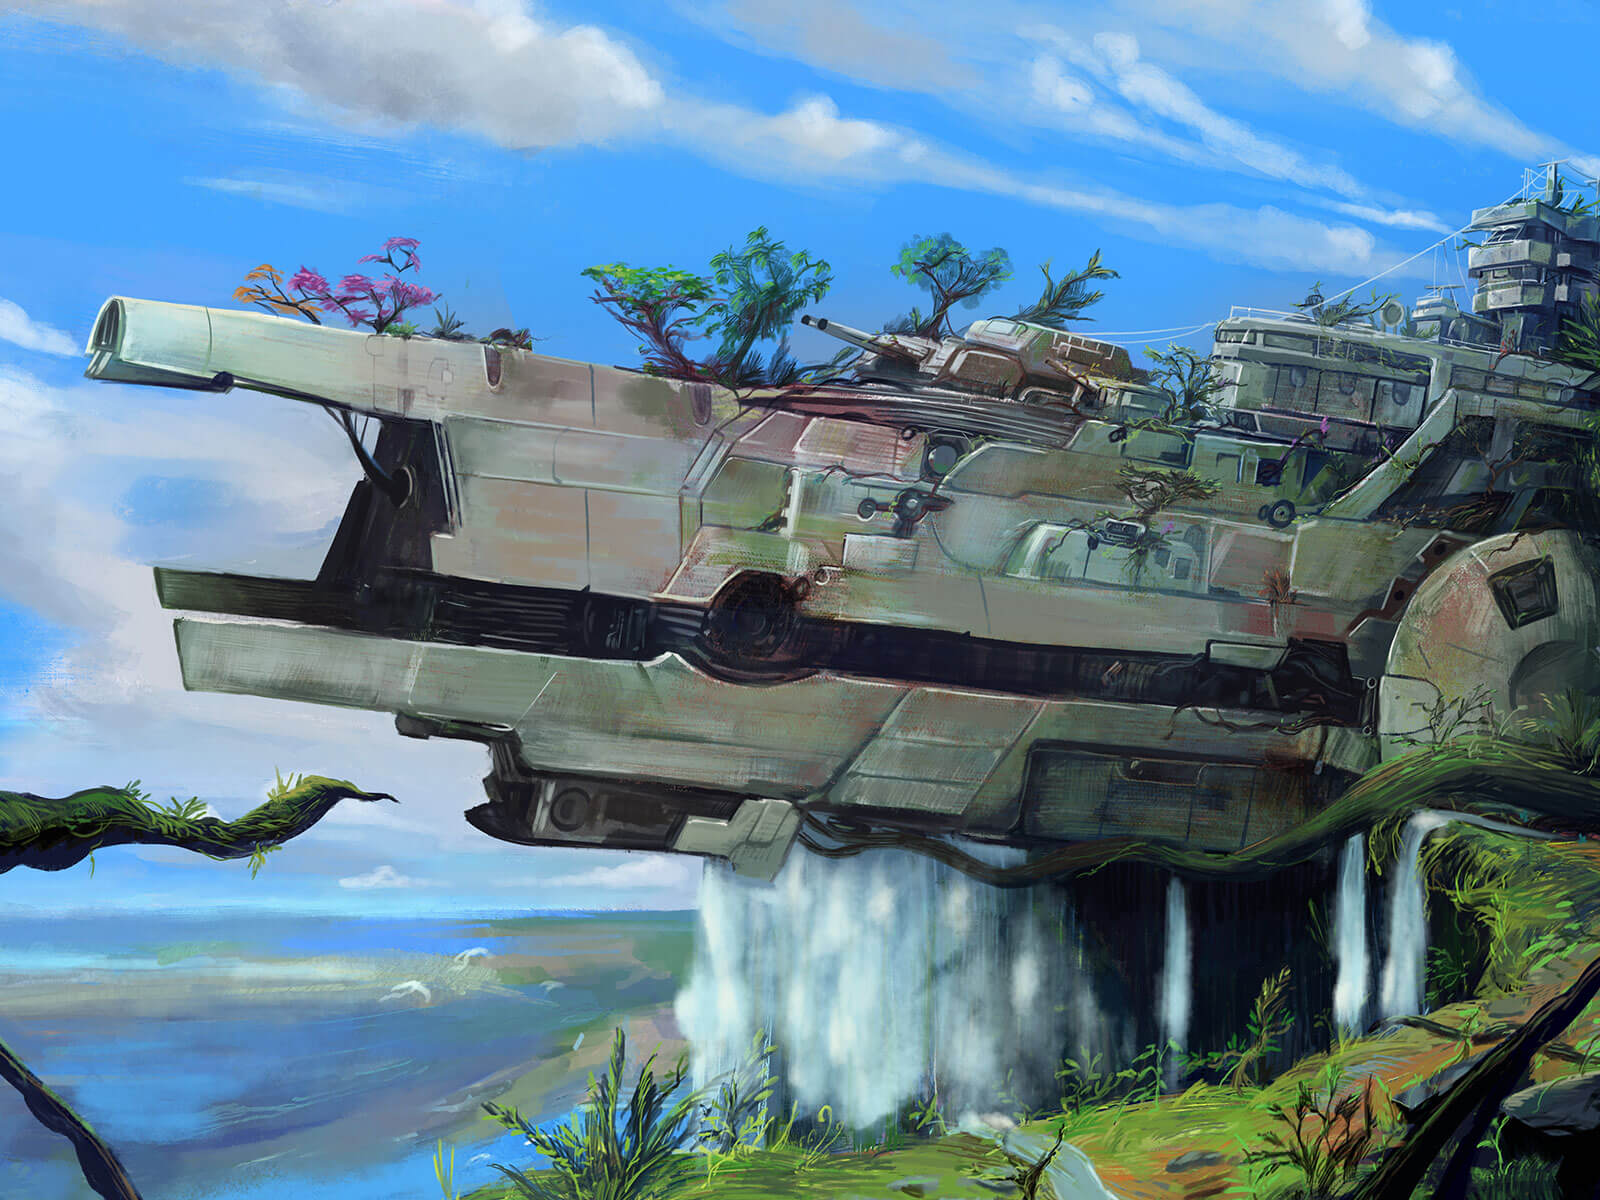 A futuristic warship overgrown with foliage lies abandoned near a waterfall.